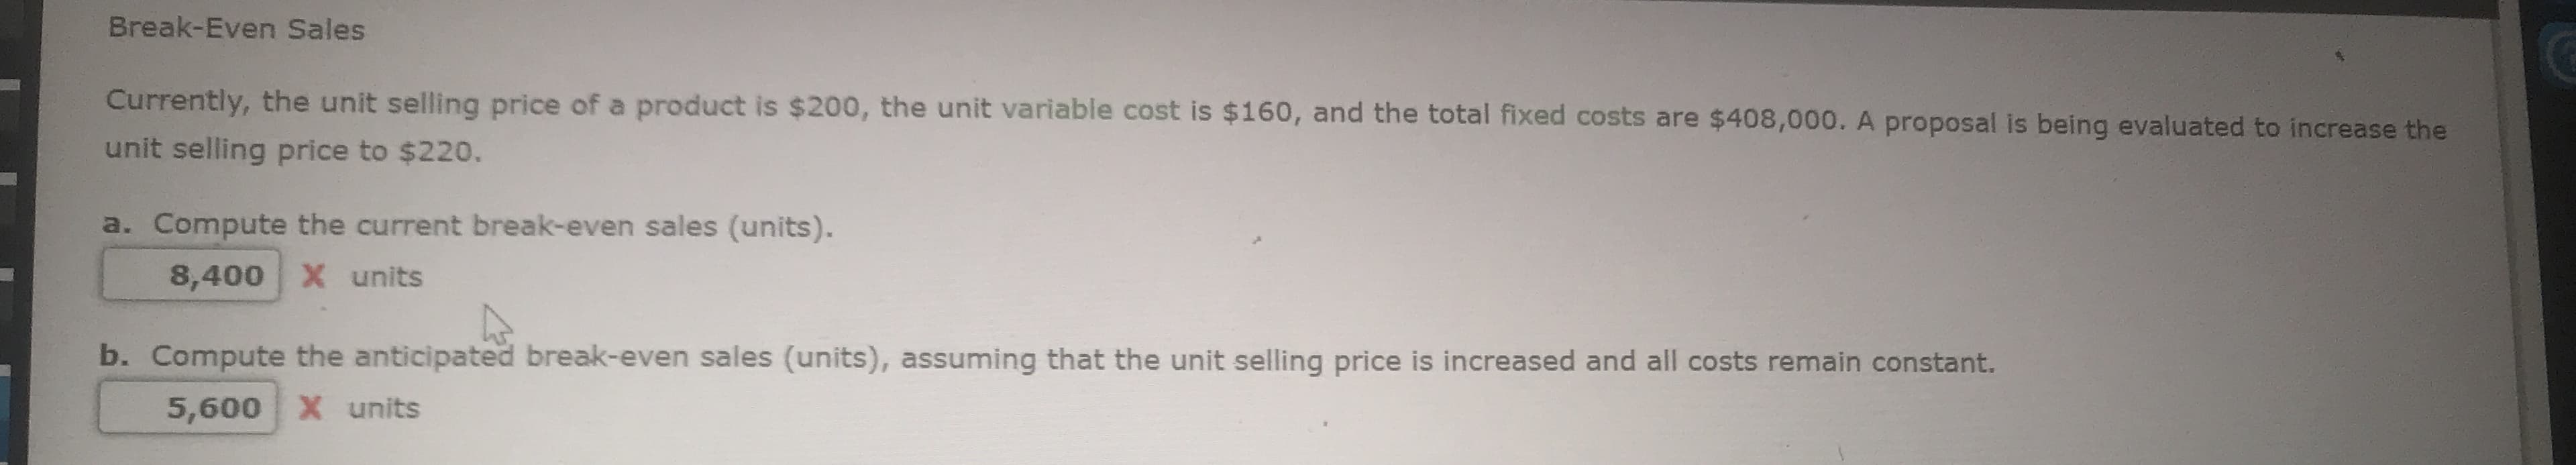 Currently, the unit selling price of a product is $200, the unit variable cost is $160, and the total fixed costs are $408,000. A proposal is being evaluated to increase the
unit selling price to $220.
a. Compute the current break-even sales (units).
8,400 X units
b. Compute the anticipated break-even sales (units), assuming that the unit selling price is increased and all costs remain constant.
5,600 X units
